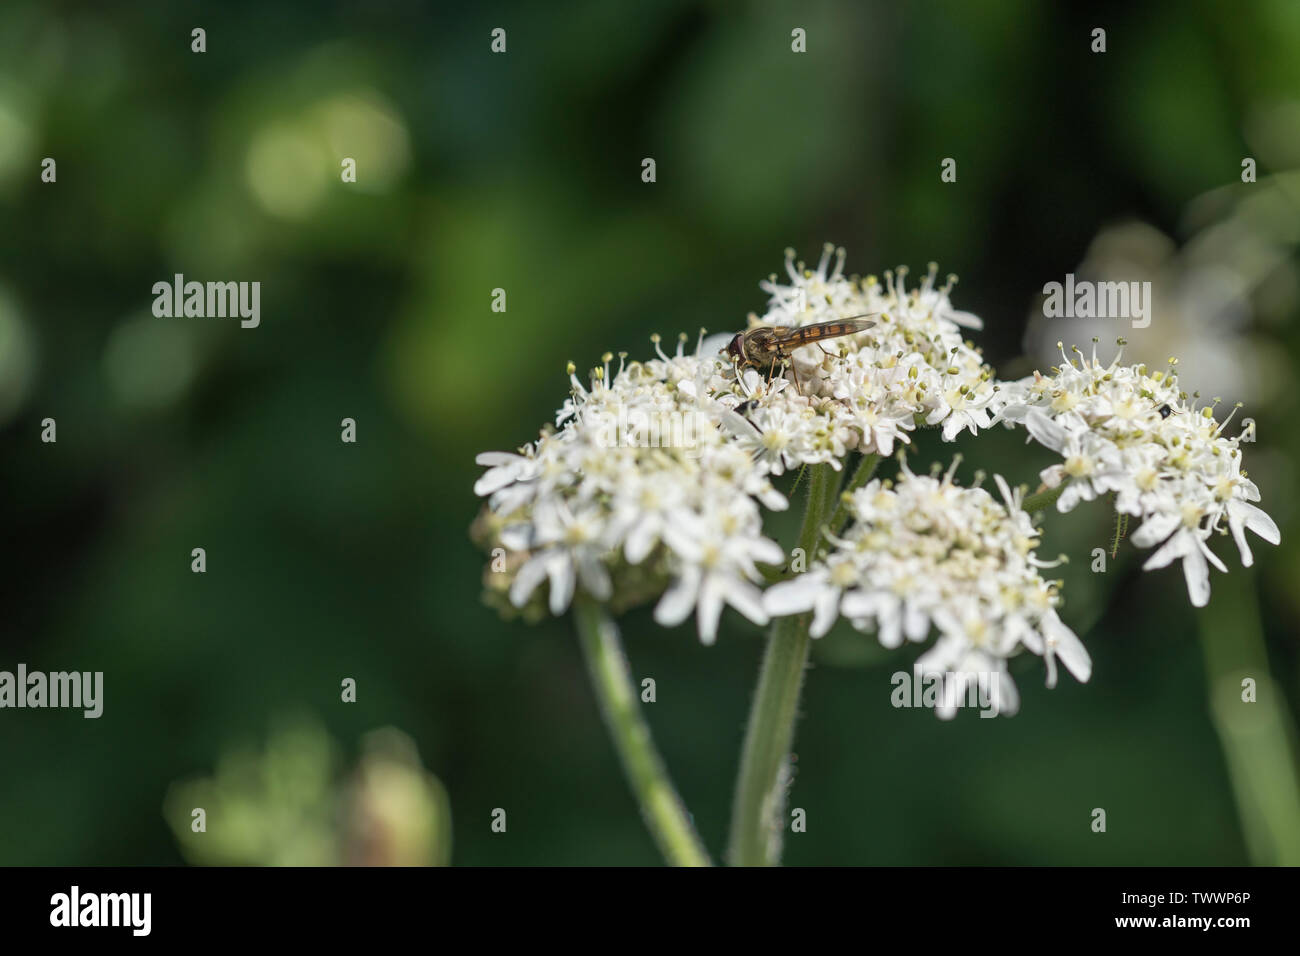 White flowers of Common Hogweed / Heracleum sphondylium in a hedgerow with a feeding foraging fly of some description. Example of Umbellifer plant. Stock Photo